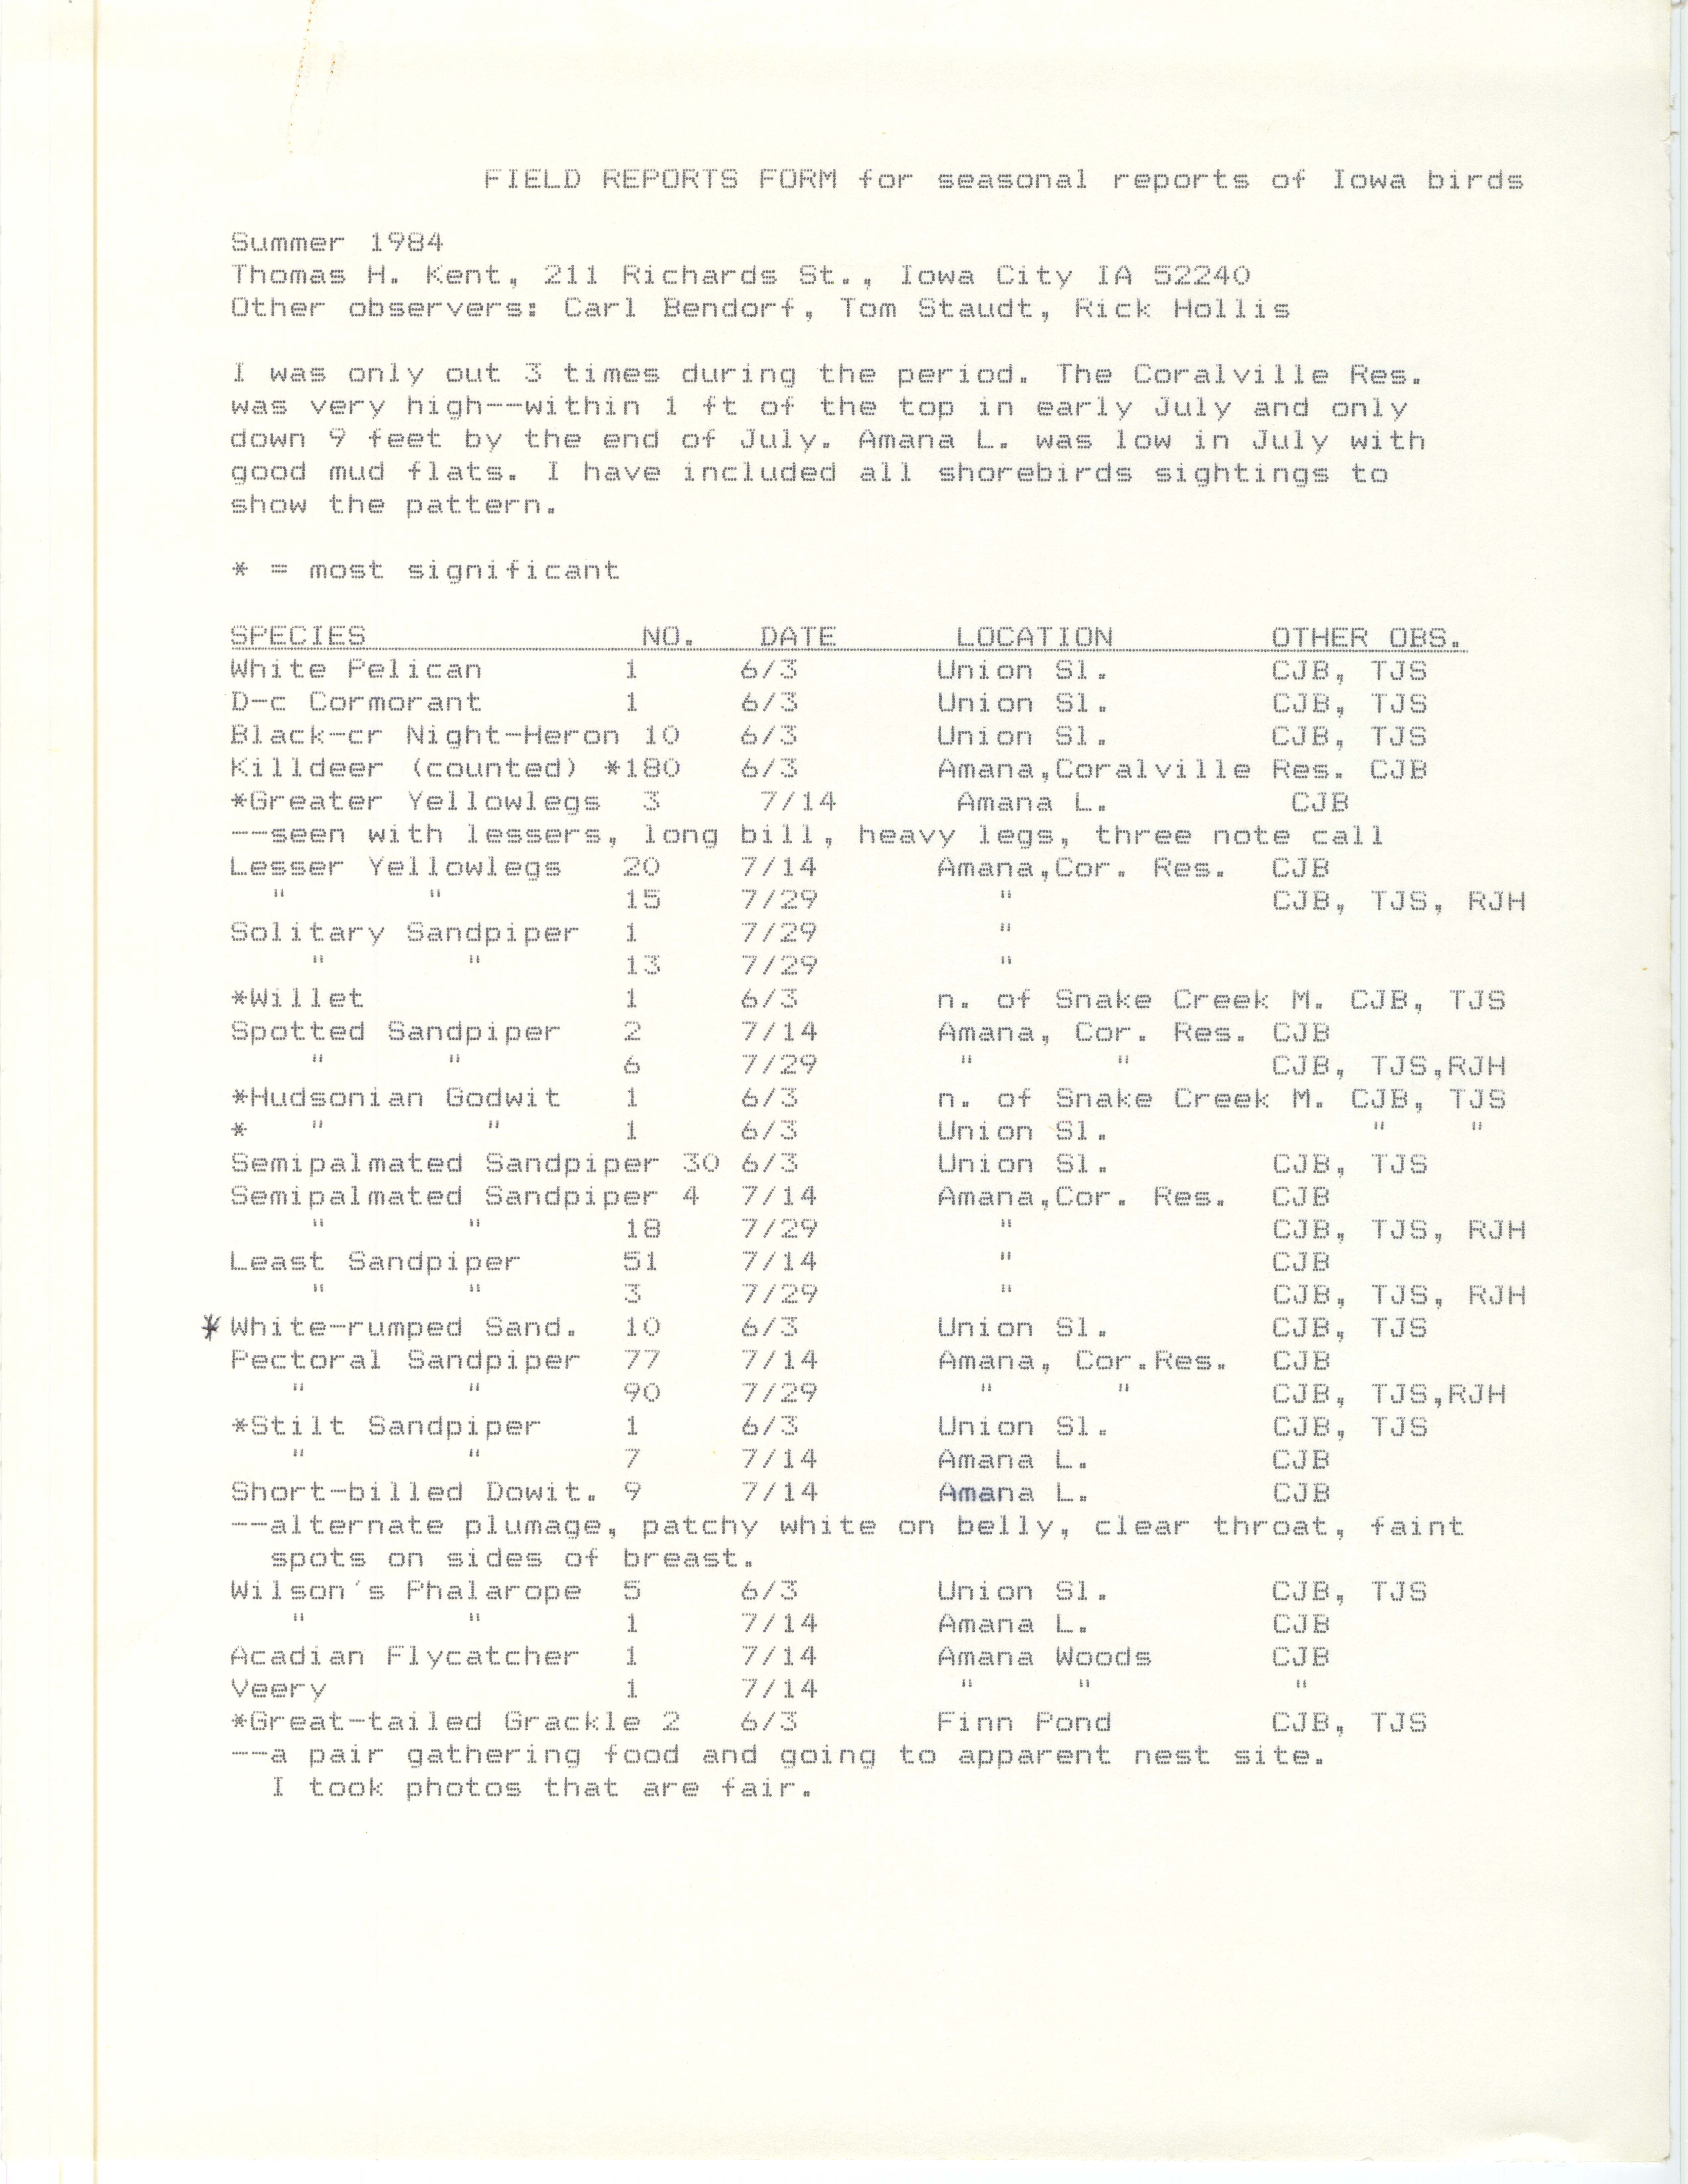 Field notes contributed by Thomas H. Kent, summer 1984